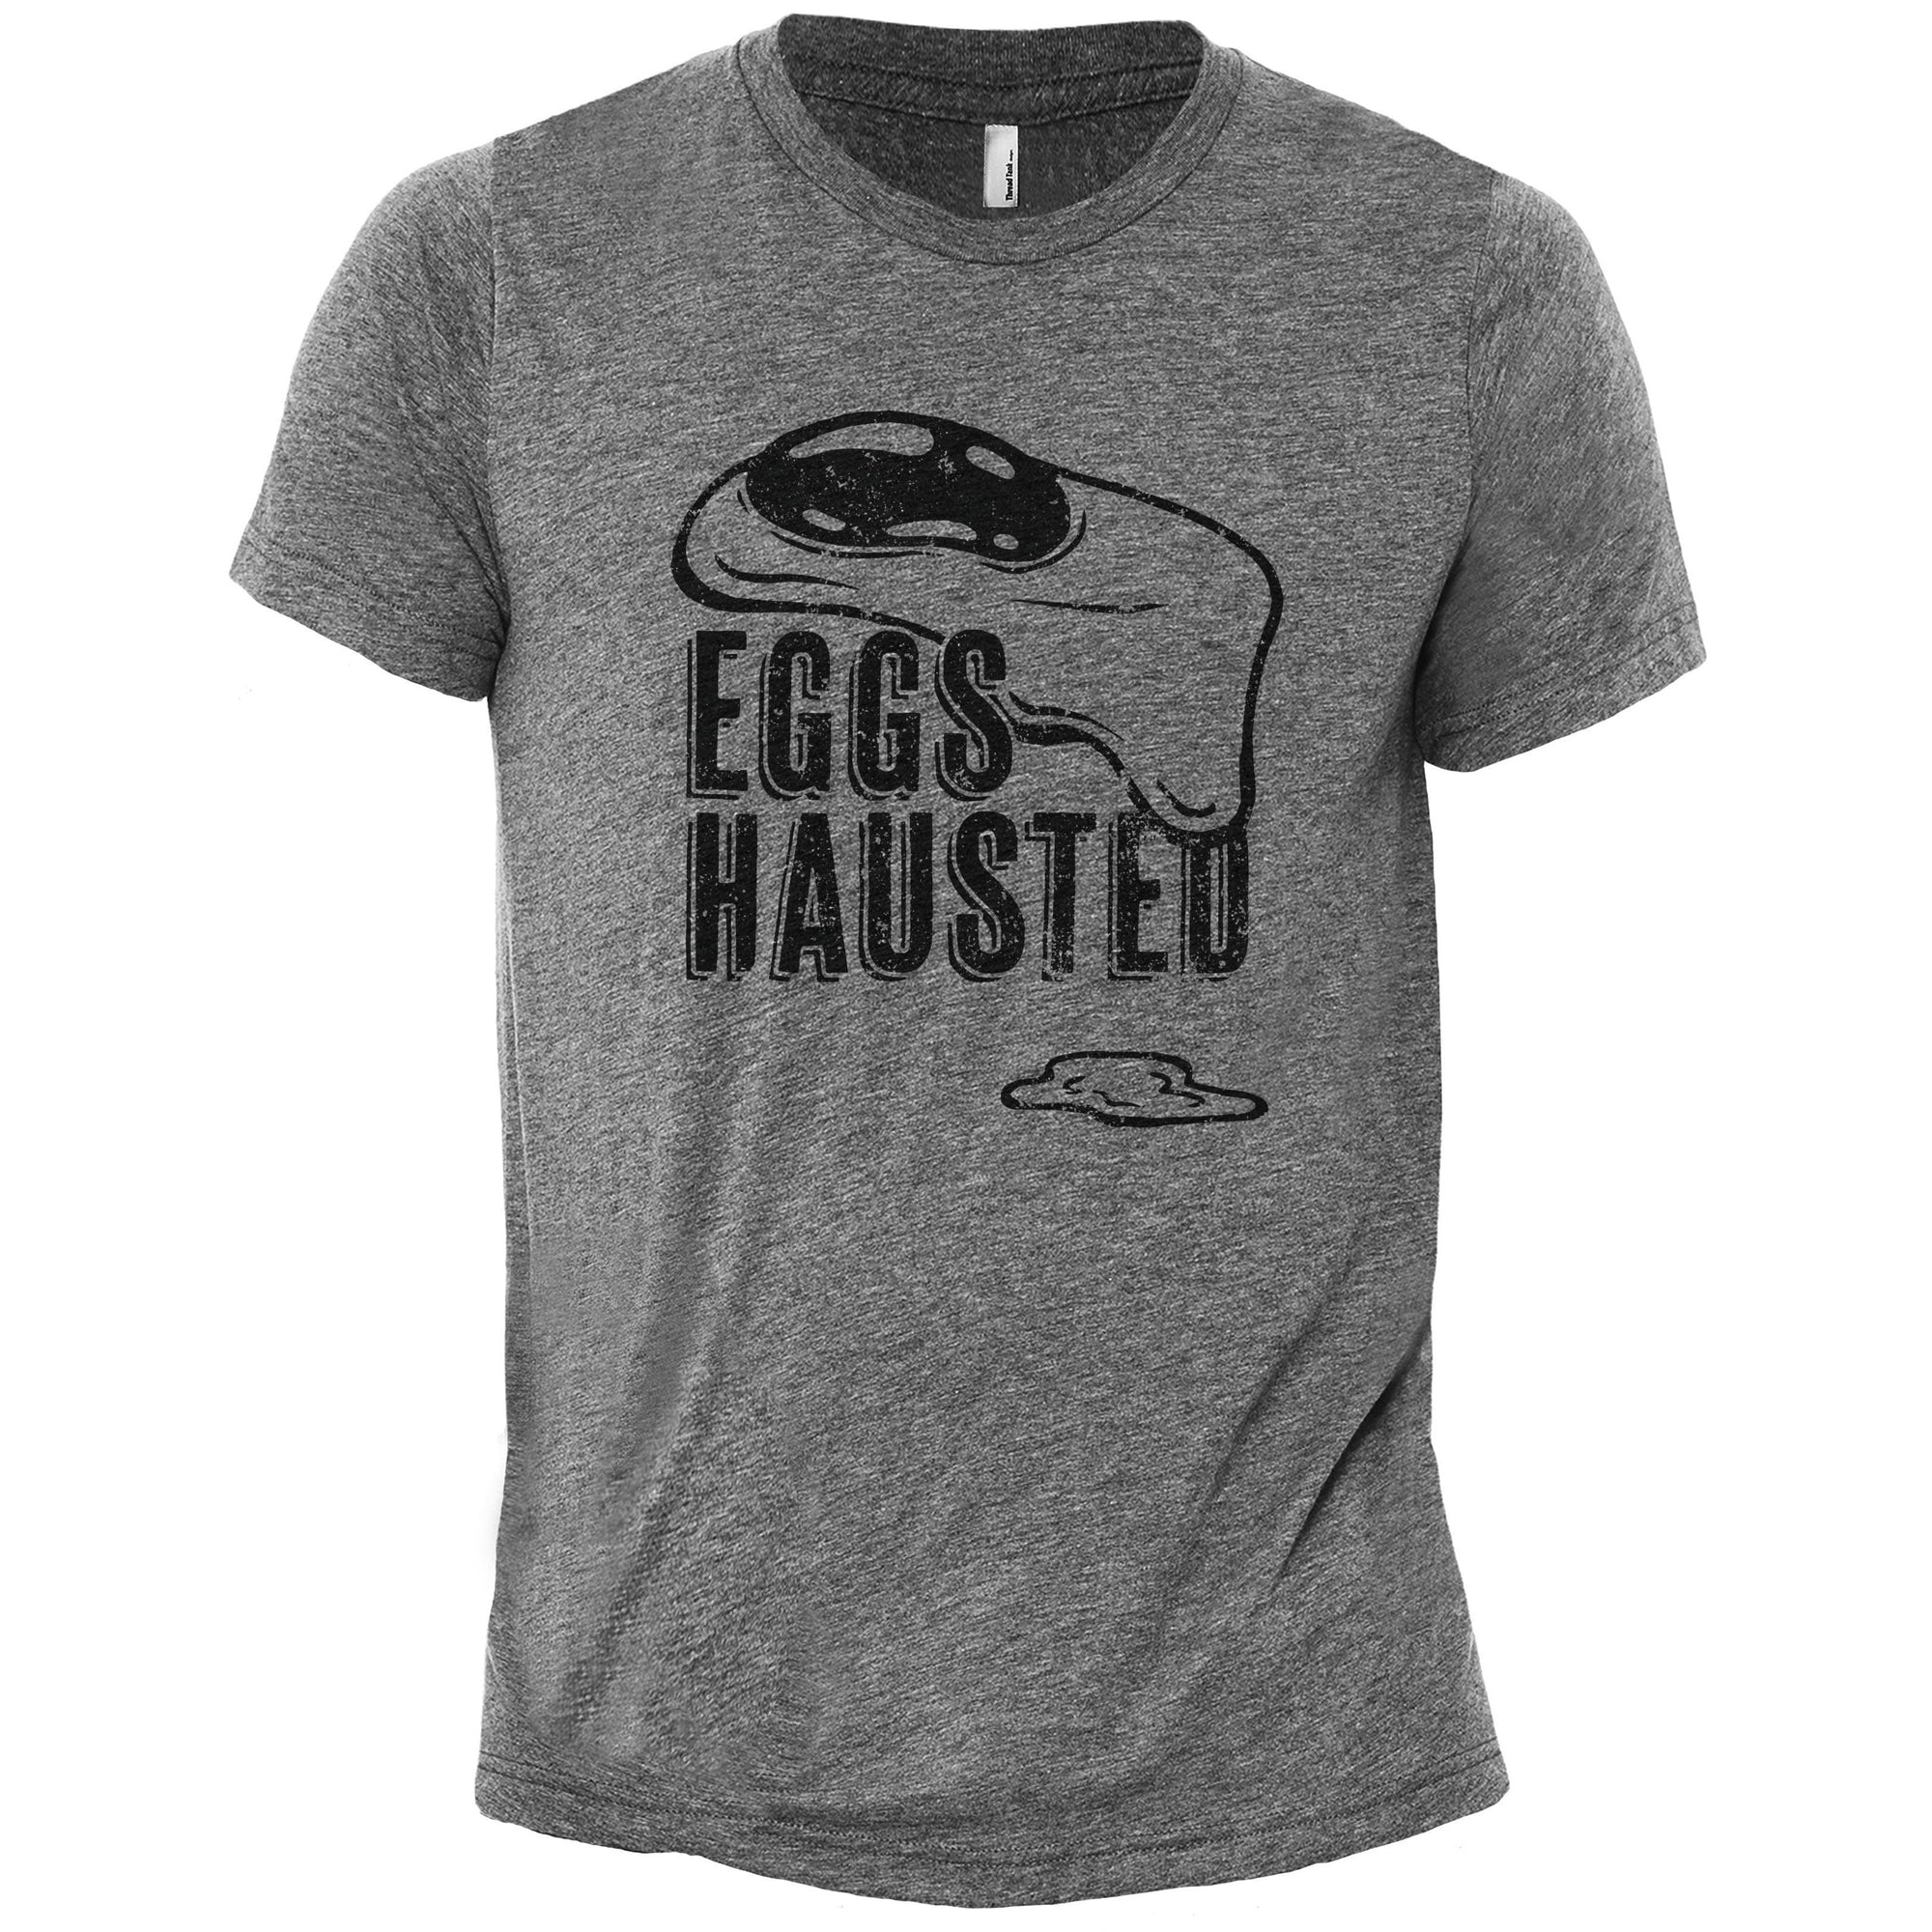 Eggshausted - thread tank | Stories you can wear.